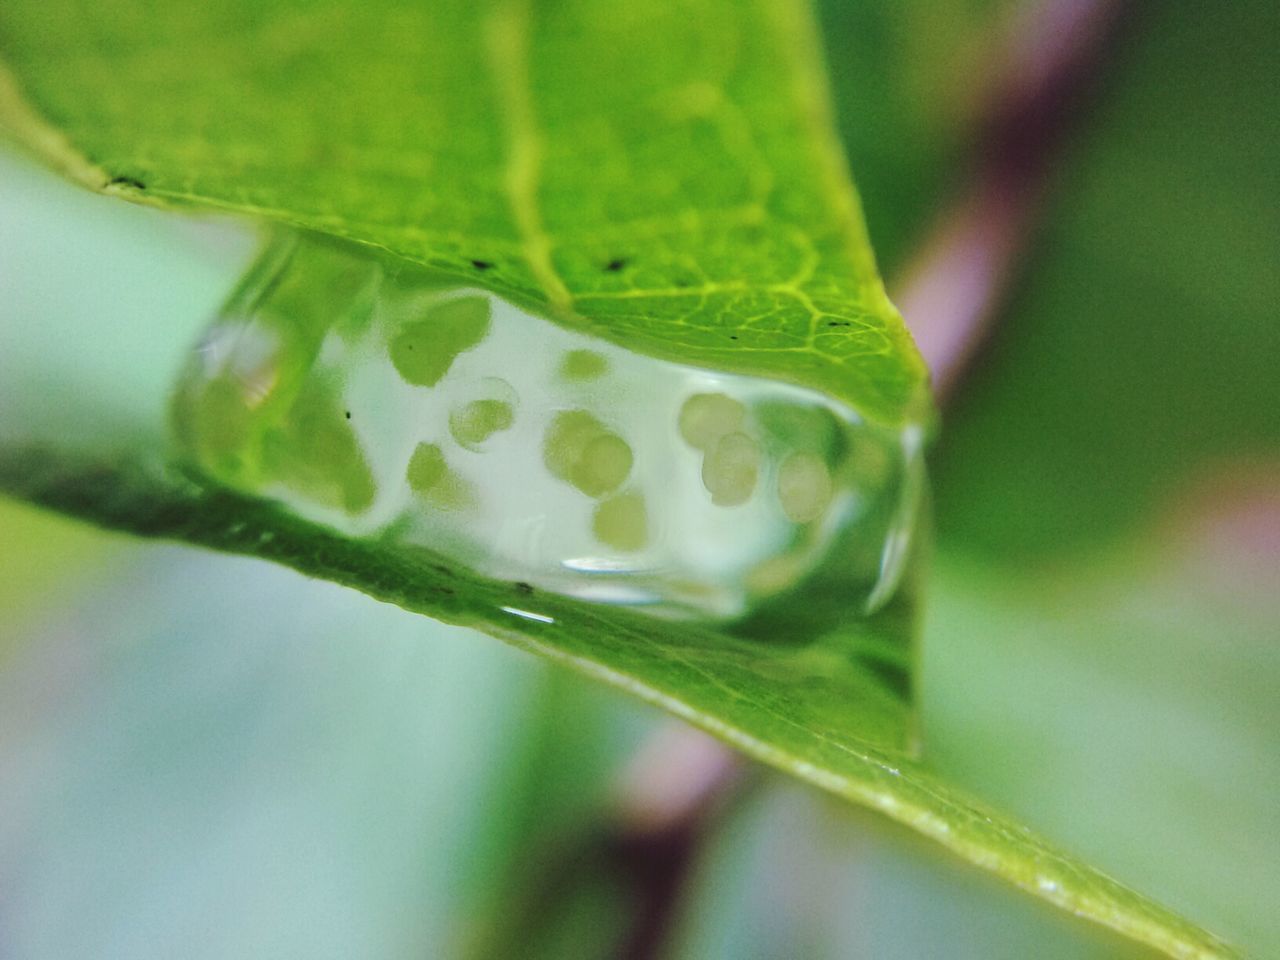 close-up, leaf, green color, focus on foreground, drop, water, freshness, growth, plant, selective focus, nature, wet, fragility, beauty in nature, green, dew, no people, purity, day, stem